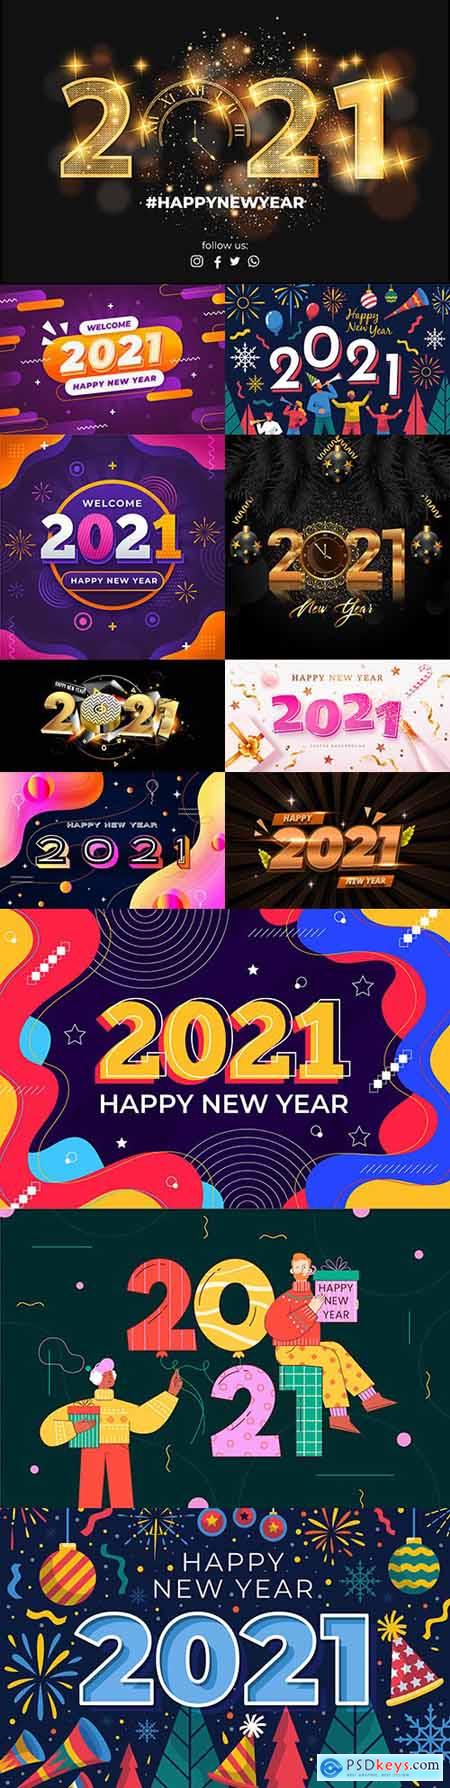 New Year 2021 background in flat design inscription